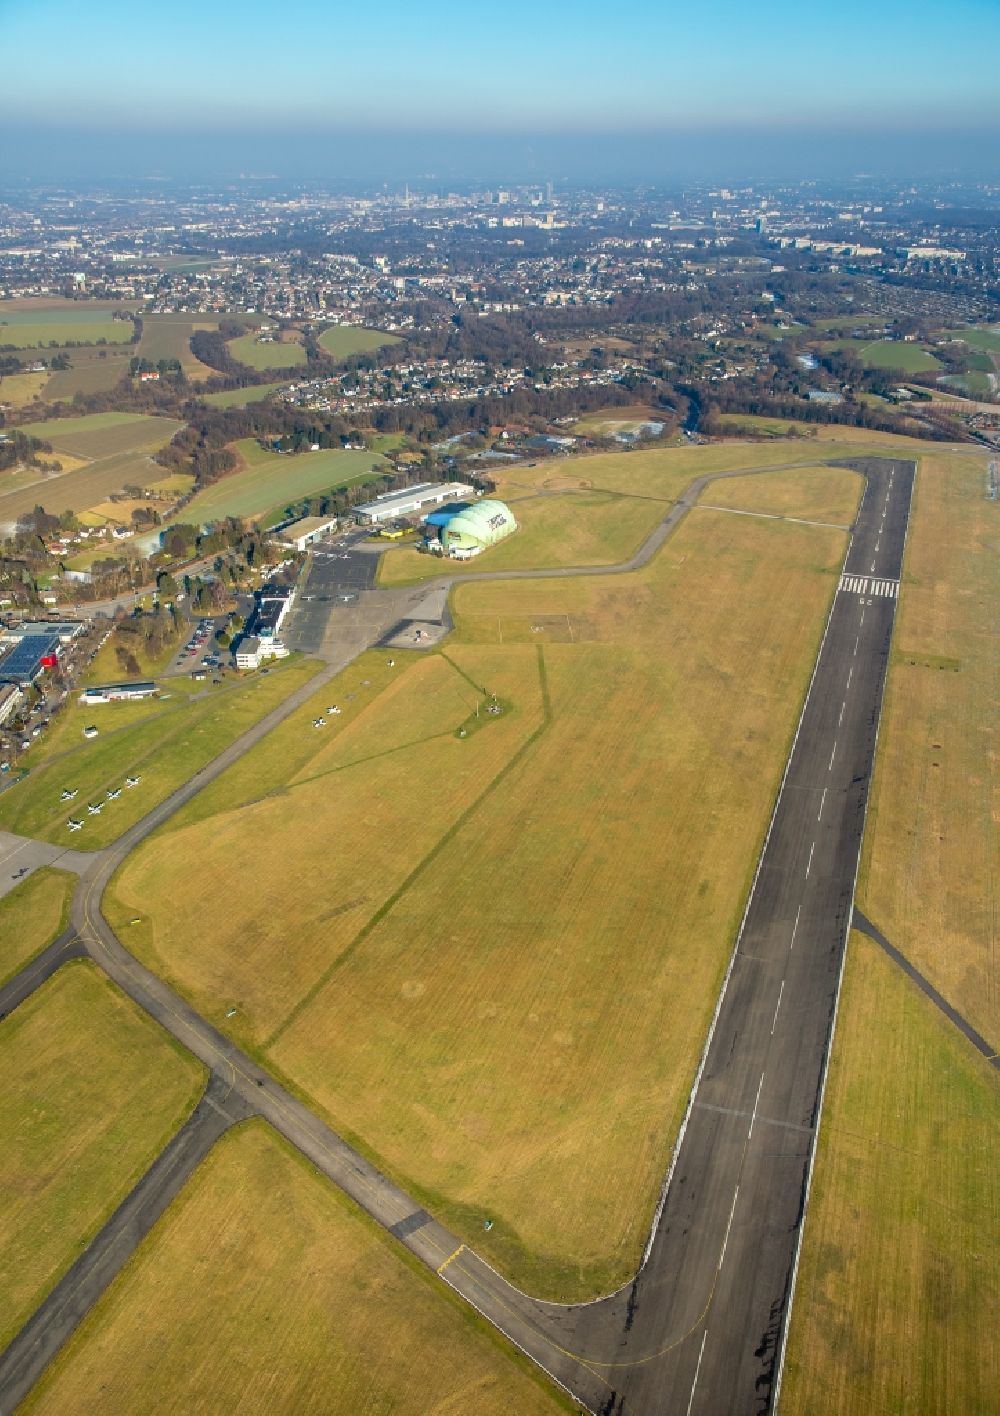 Aerial image Mülheim an der Ruhr - Runway with hangar taxiways and terminals on the grounds of the airport in the district Flughafensiedlung in Muelheim on the Ruhr in the state North Rhine-Westphalia